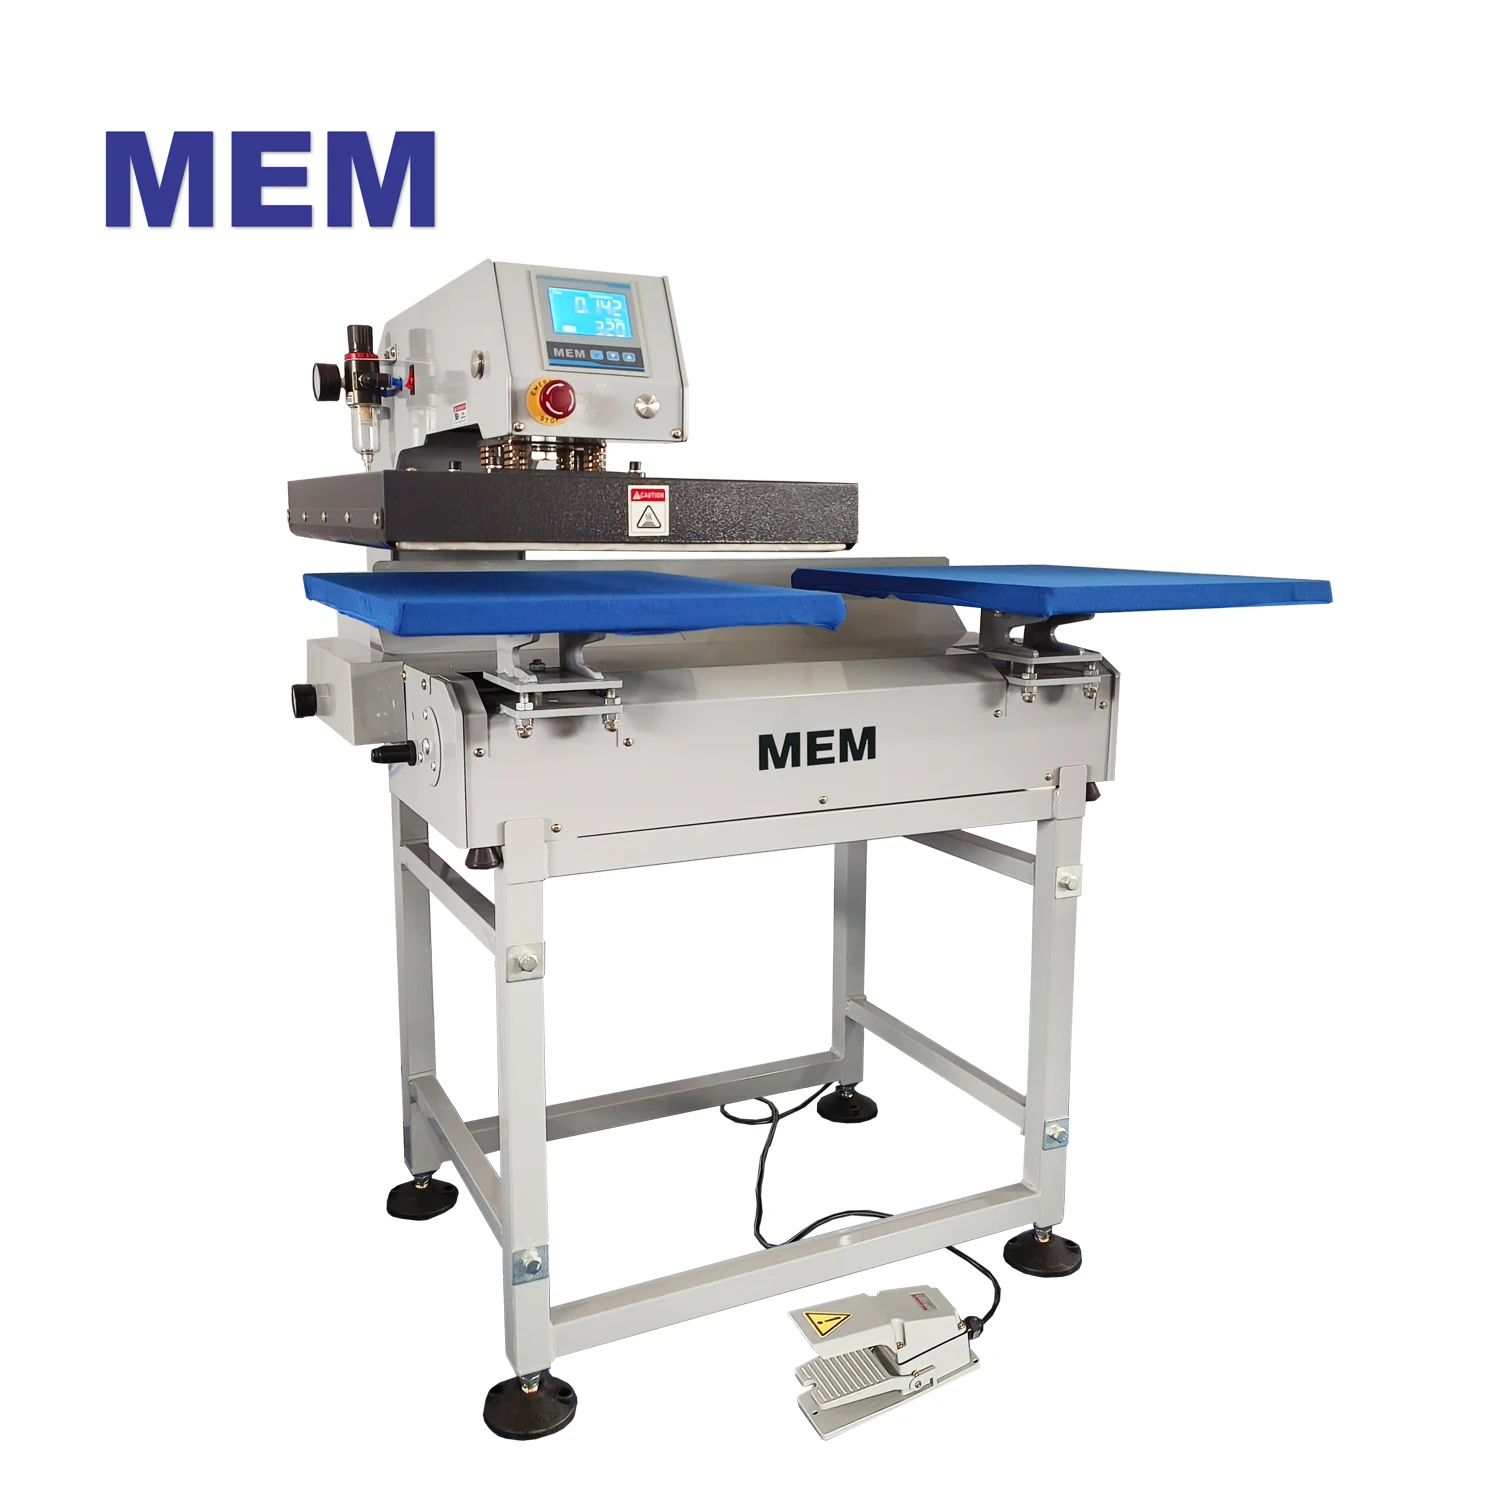 

TQB 4050L US warehouse 16 x 20 automatic sublimation heat press machine laser locator included for t-shirt